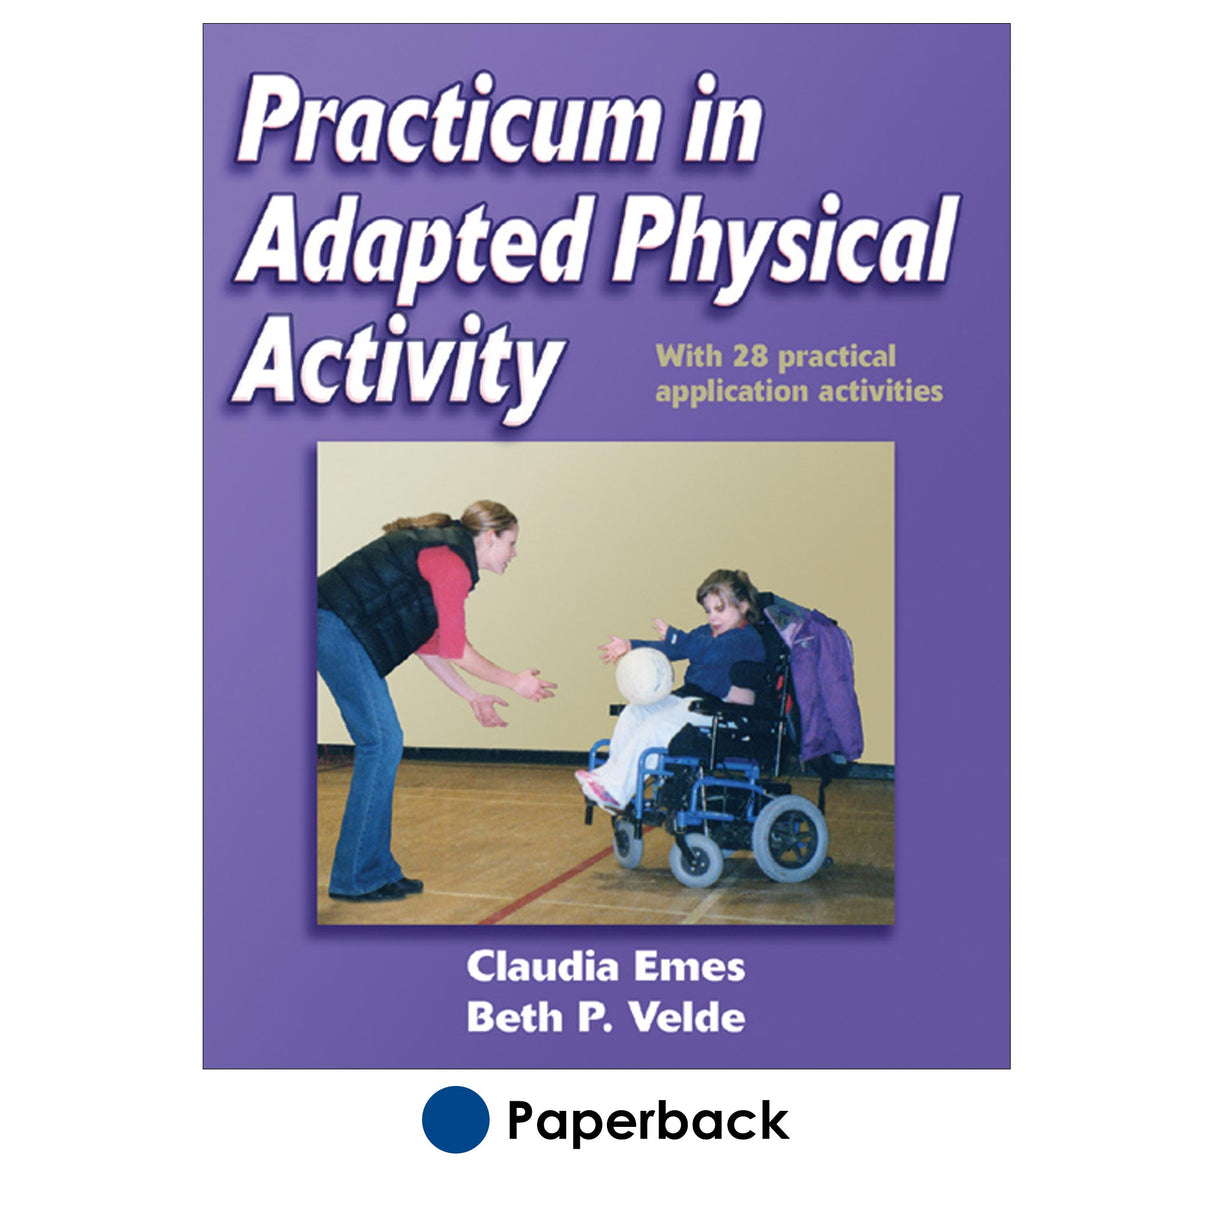 Practicum in Adapted Physical Activity